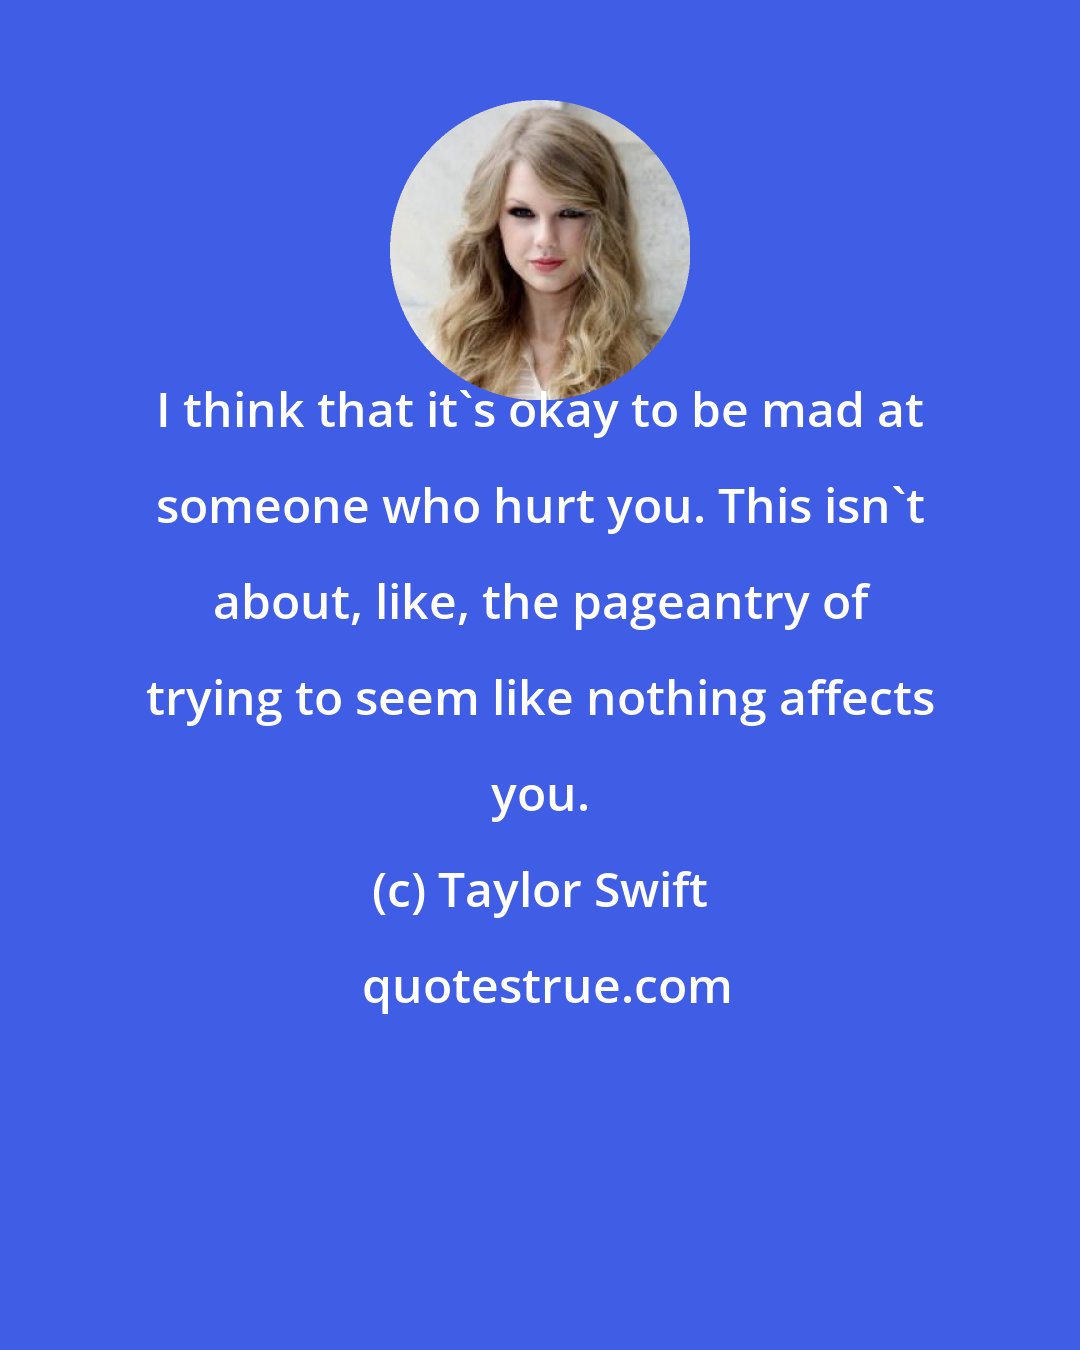 Taylor Swift: I think that it's okay to be mad at someone who hurt you. This isn't about, like, the pageantry of trying to seem like nothing affects you.